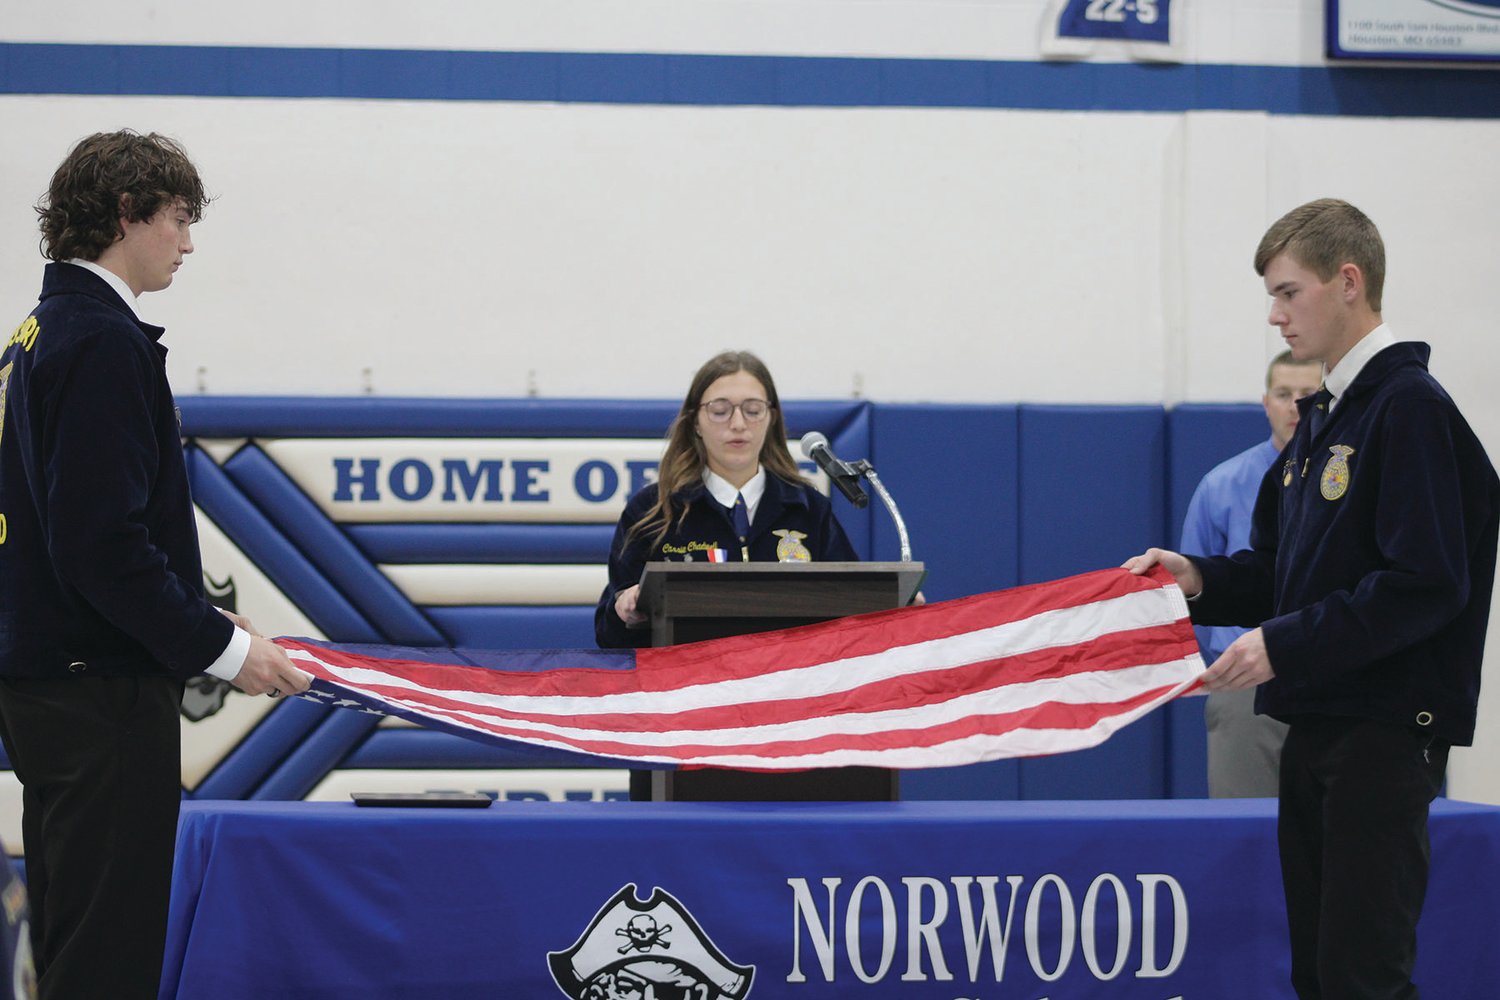 Justin Chadwell, Cassie Chadwell and Christopher Edwards during a Flag Folding Ceremony in Norwood.